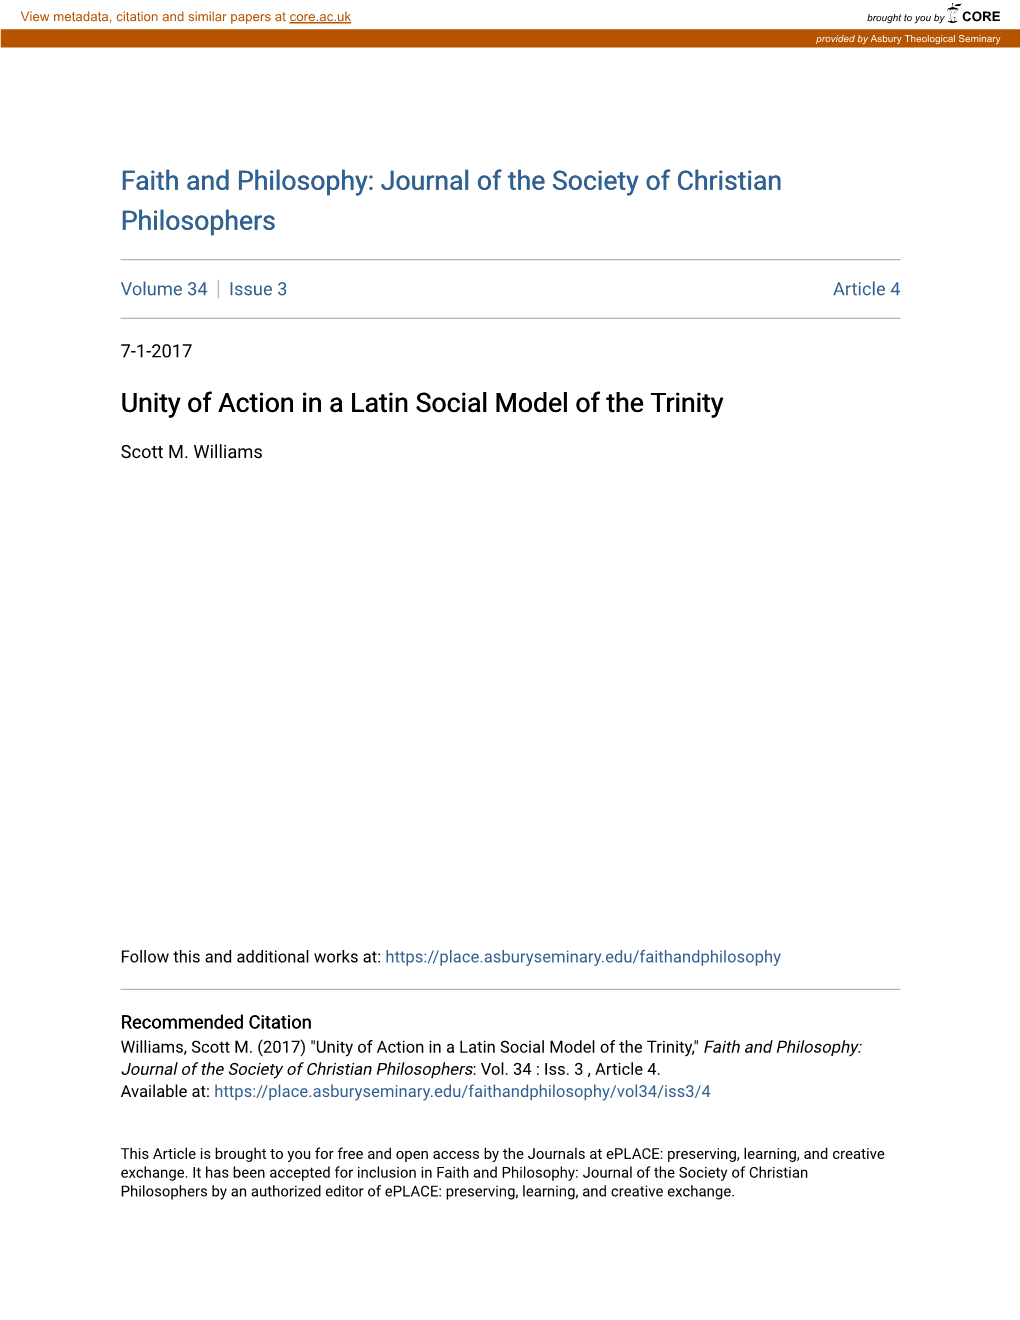 Unity of Action in a Latin Social Model of the Trinity